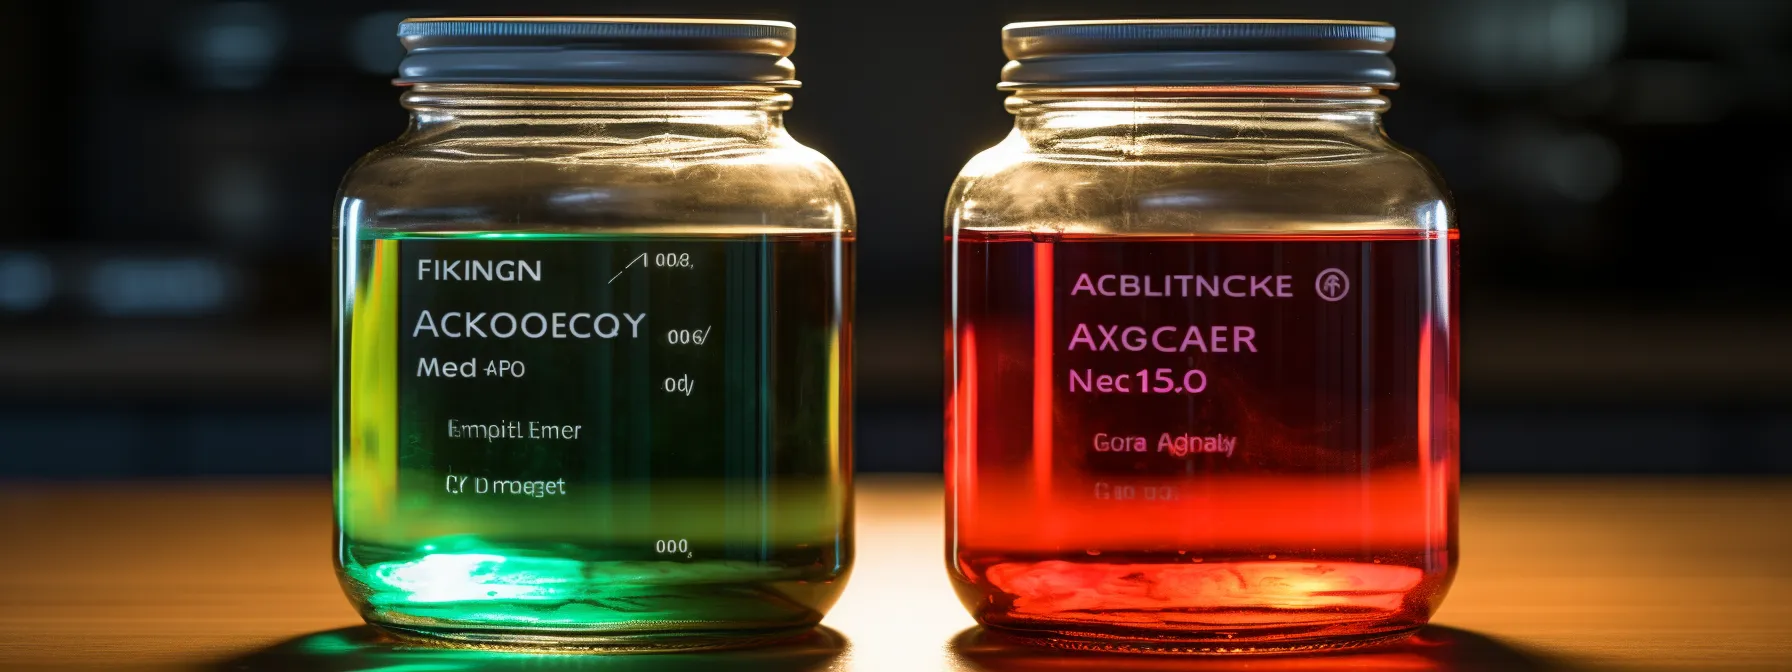 two glass jars filled with different colored liquids, one red and one green, labeled "aerobic" and "anaerobic," respectively.